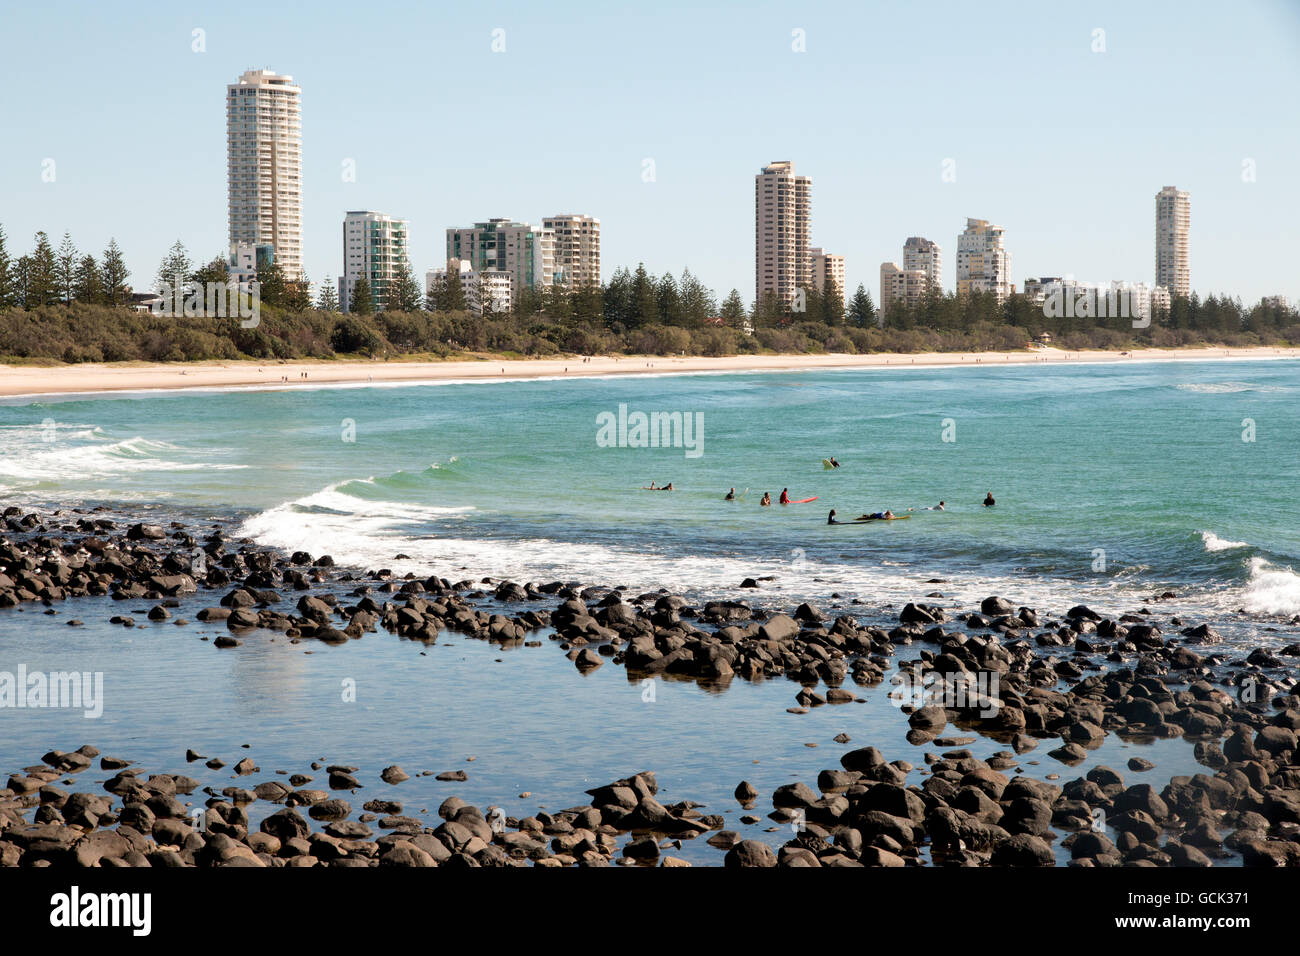 Surfers waiting to catch a wave at Burleigh Heads on the Gold Coast in Australia Stock Photo